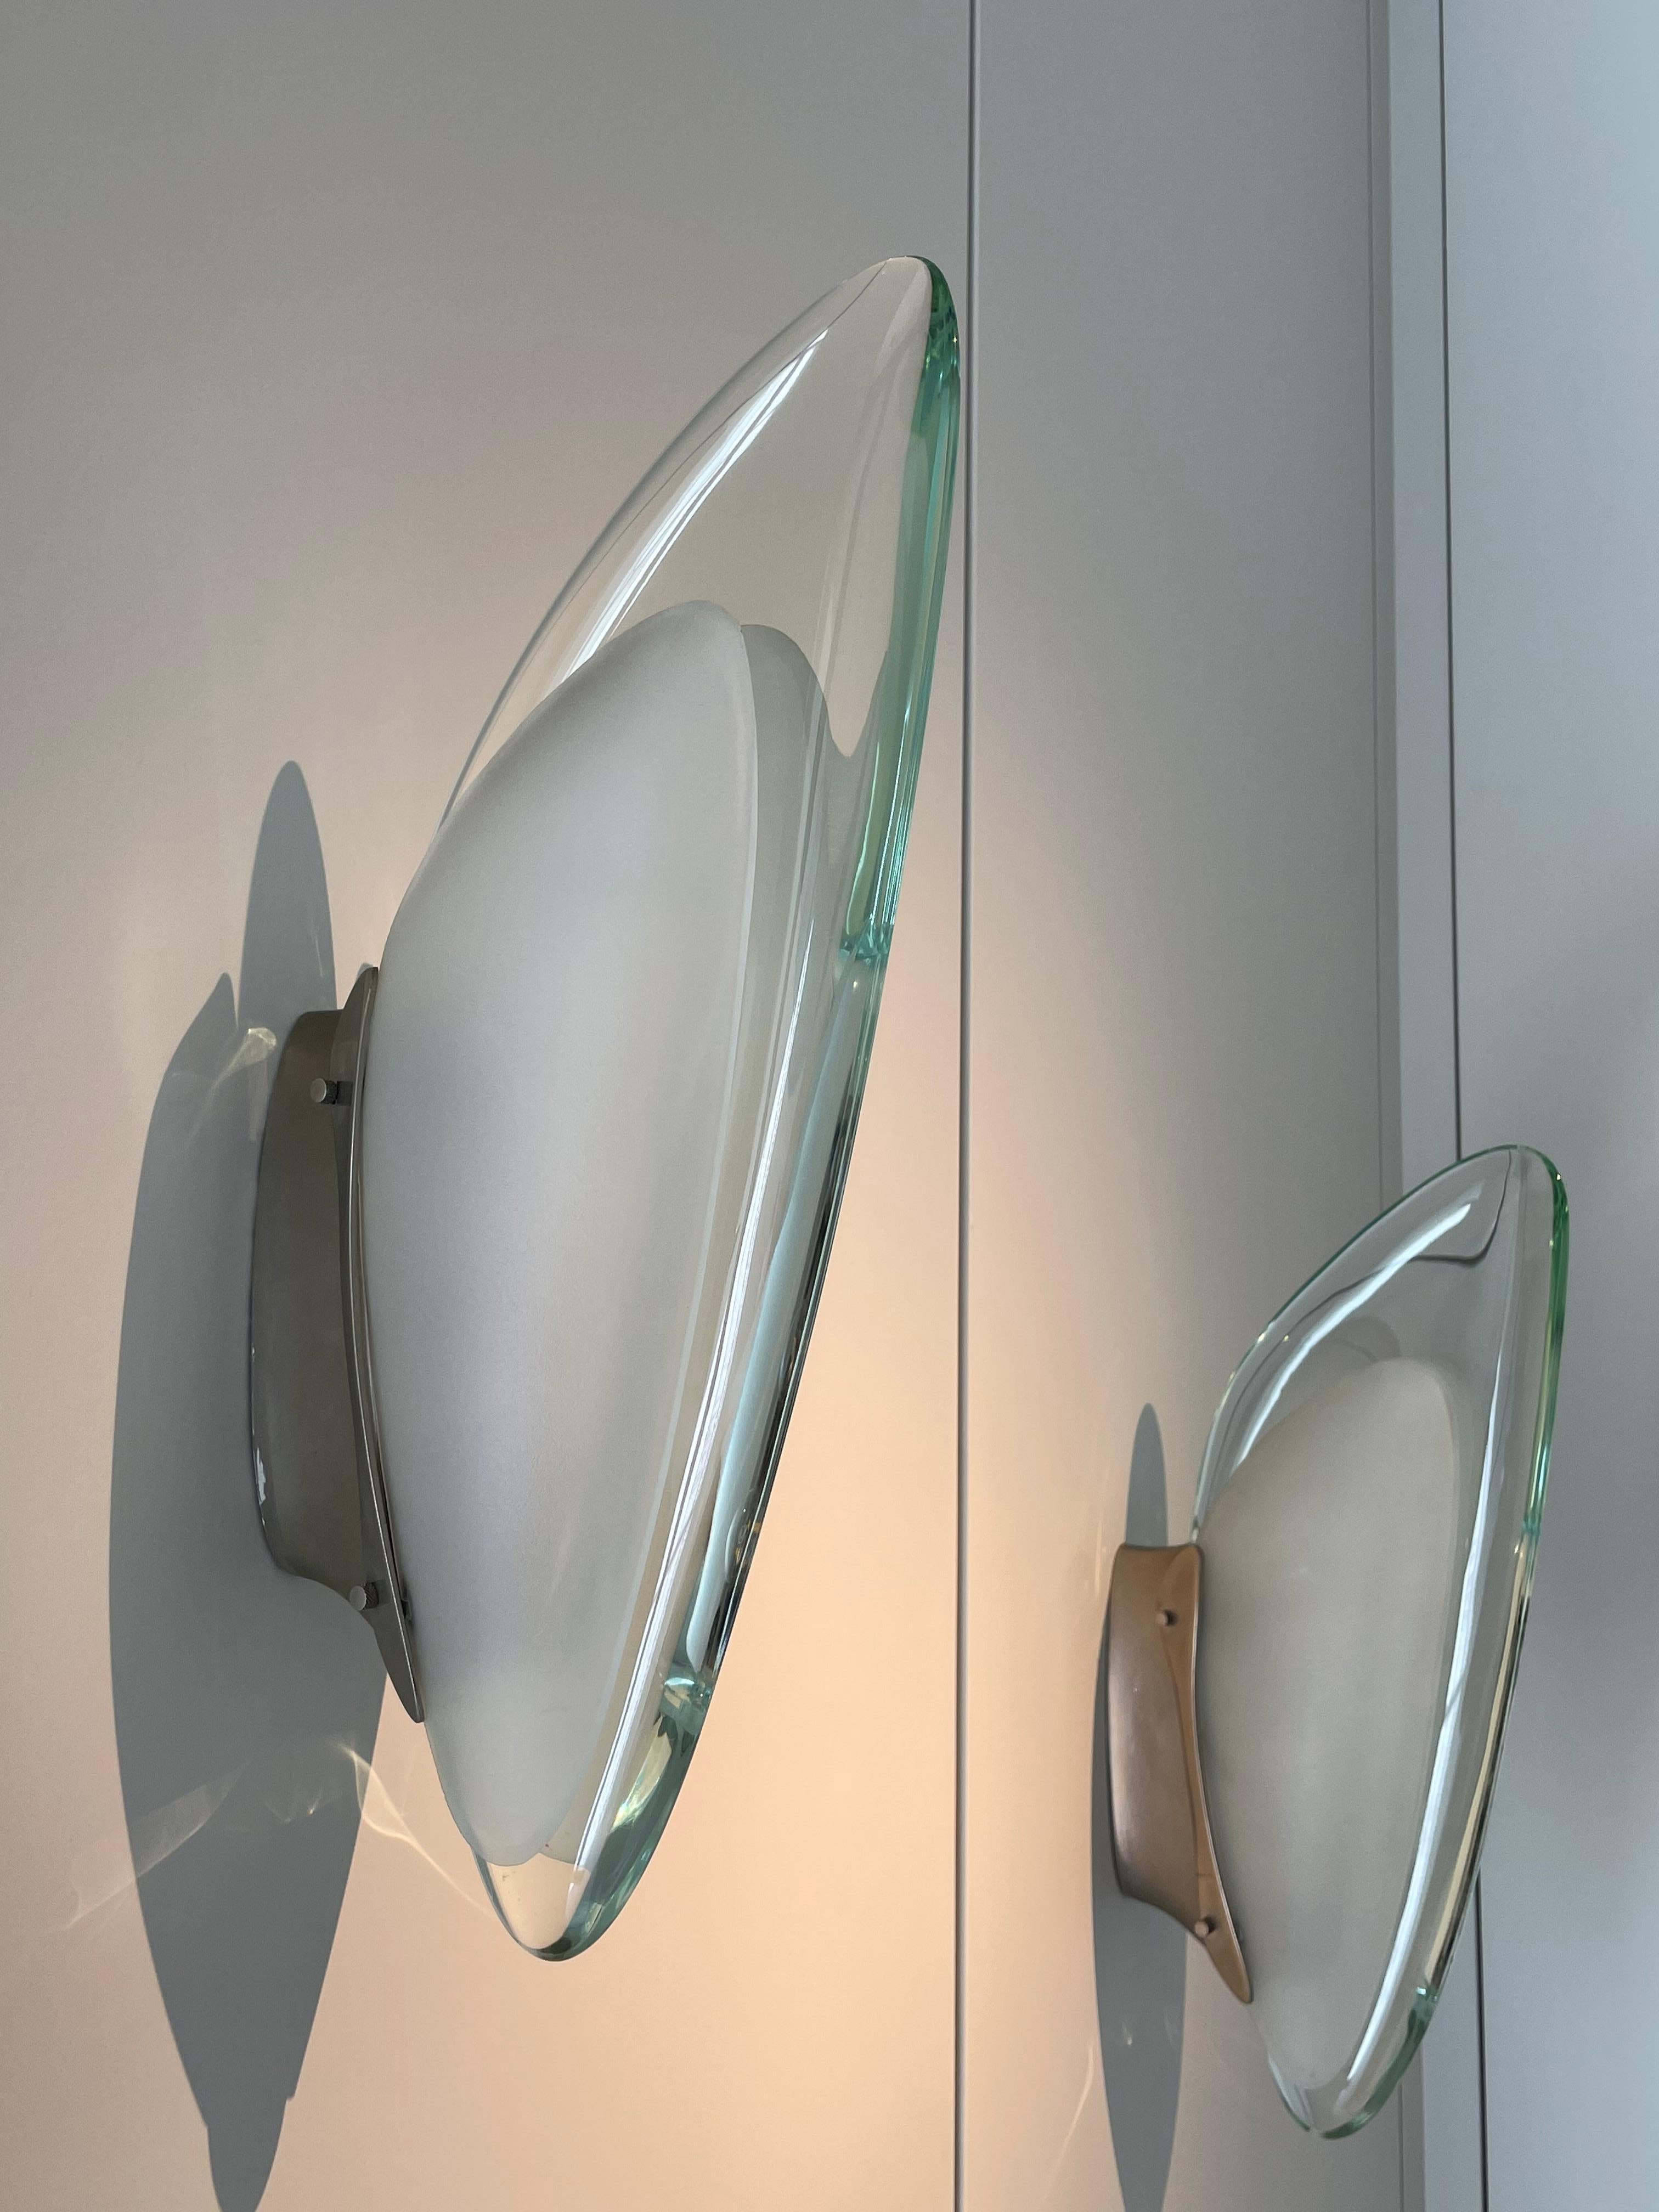 Pair of wall lamp by Max Ingrand for Fontana Arte Italy, 1965.
Shell made of a thick slightly green tinted glass and two sandblasted glass lobes, nickel-plated brass plate,
accommodating three small lights.
Excellent vintage patina.